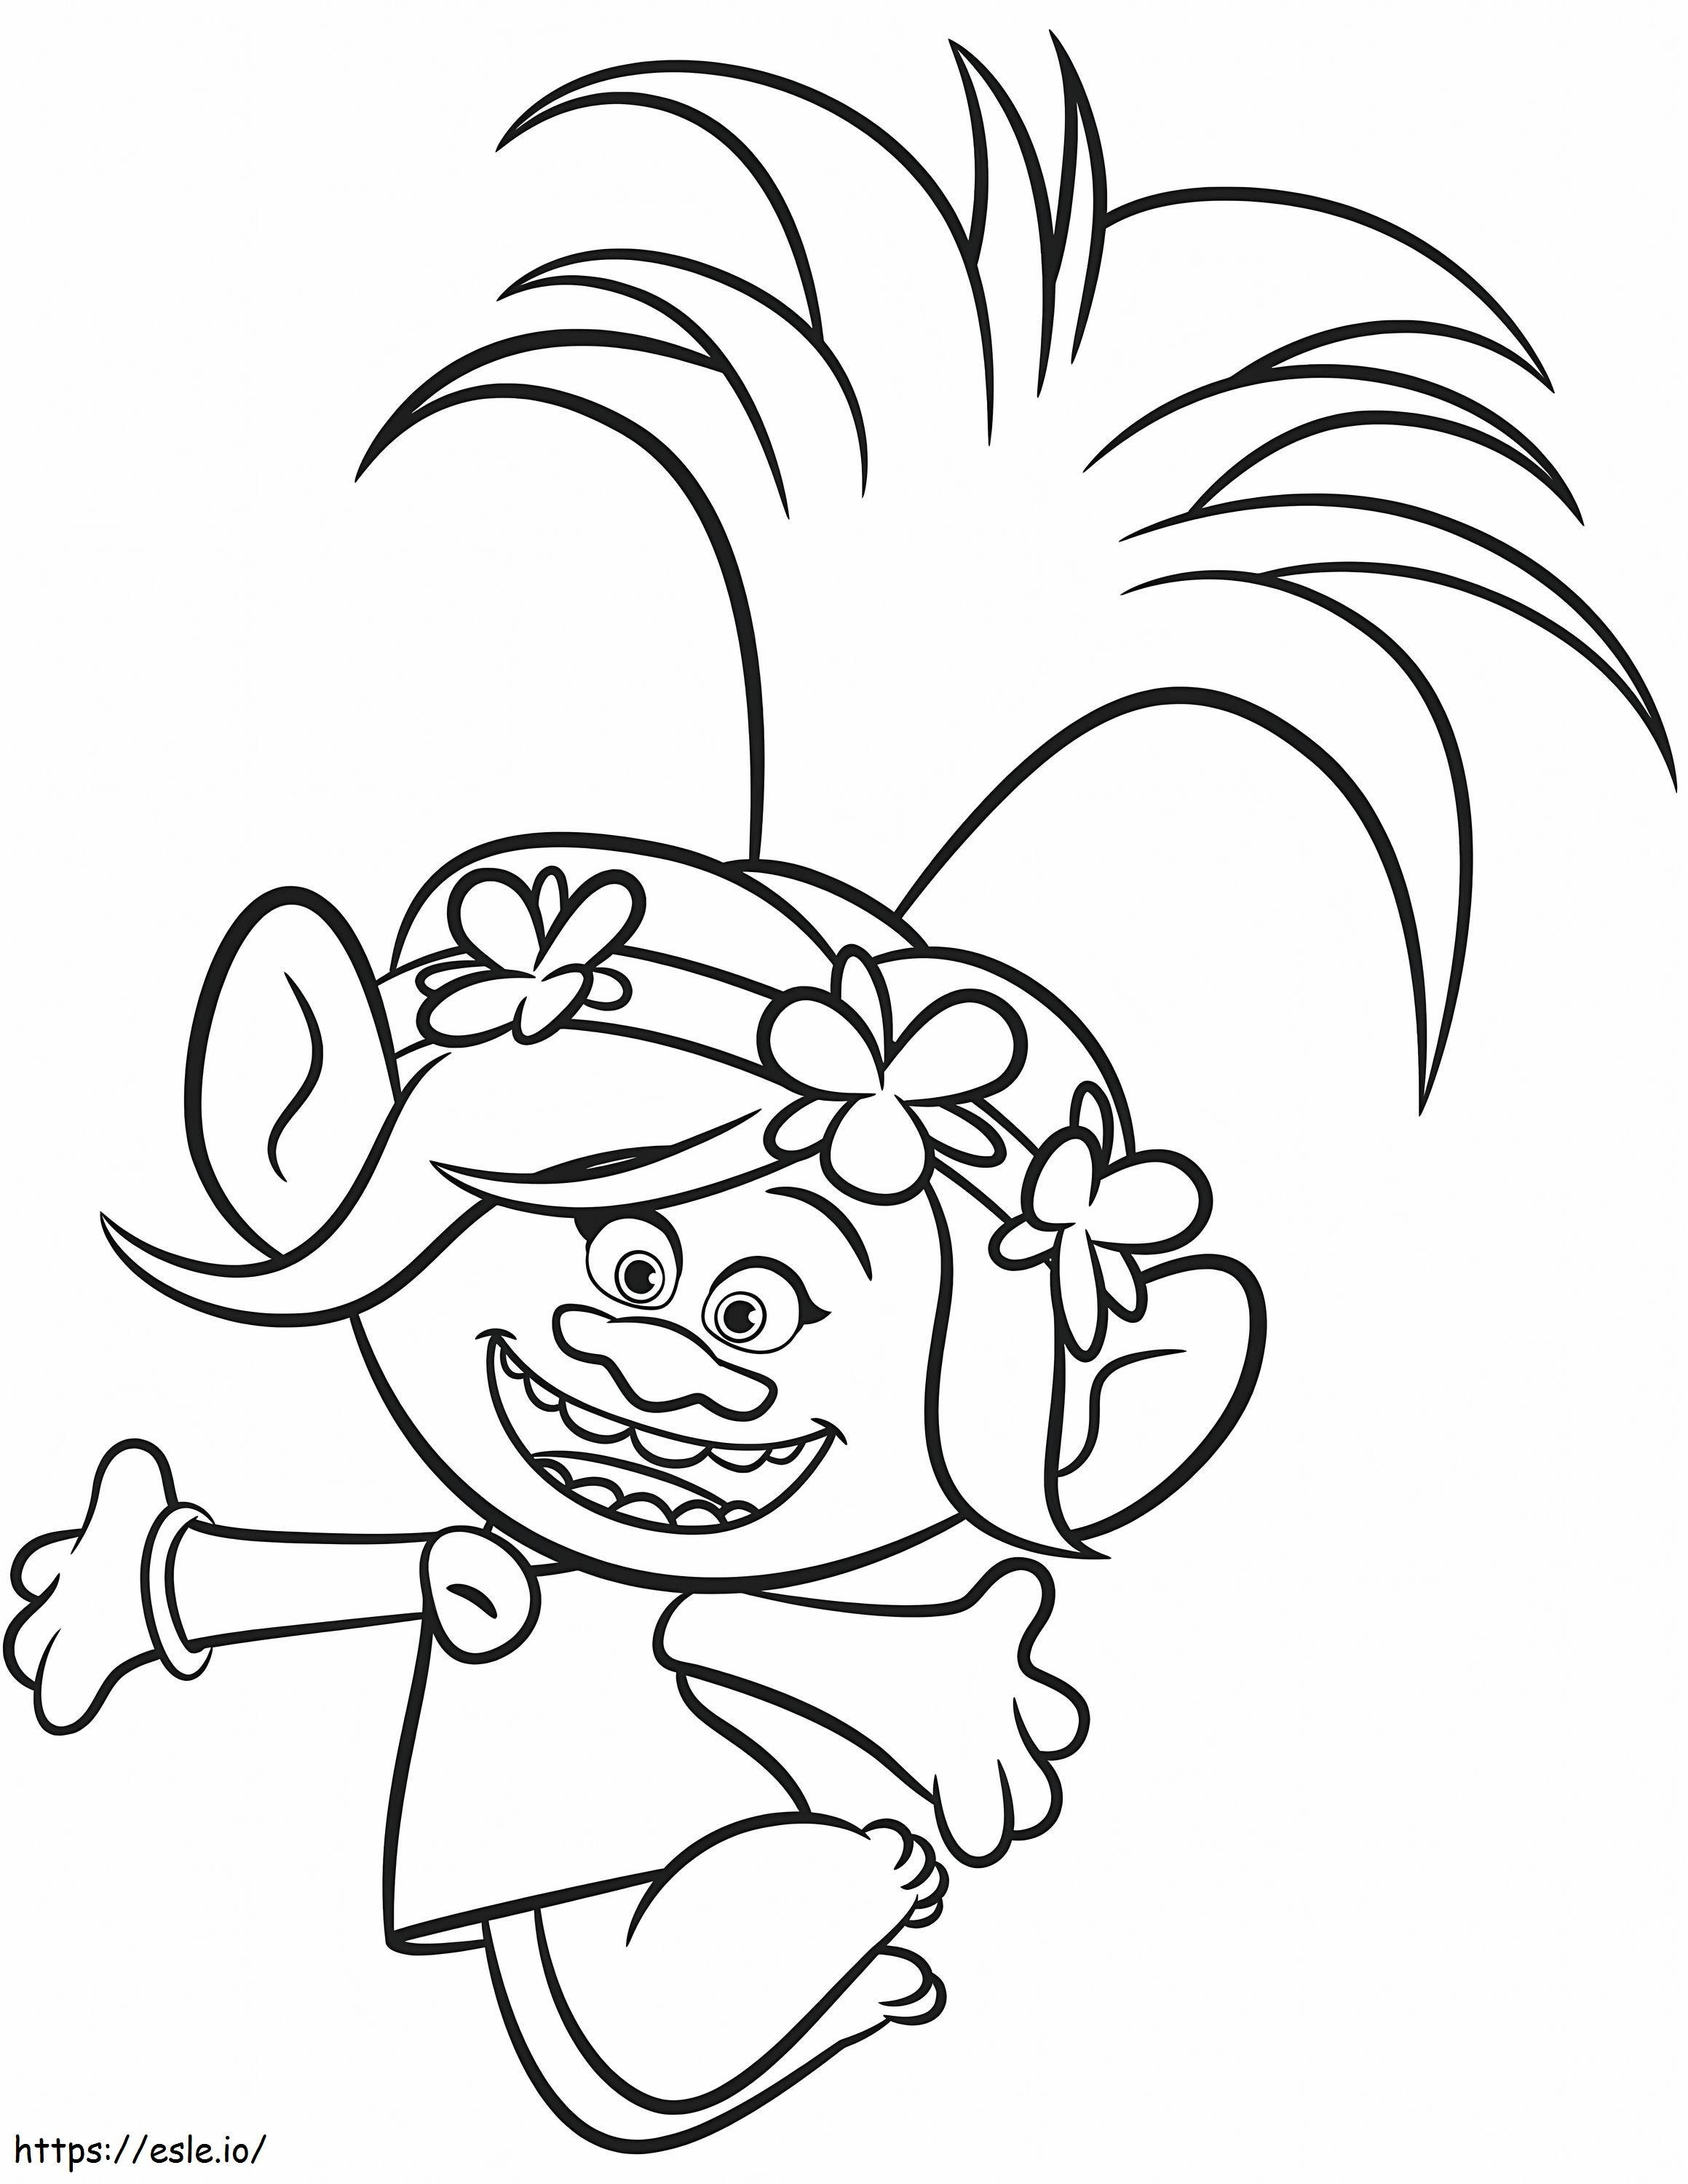 Poppy Hop coloring page